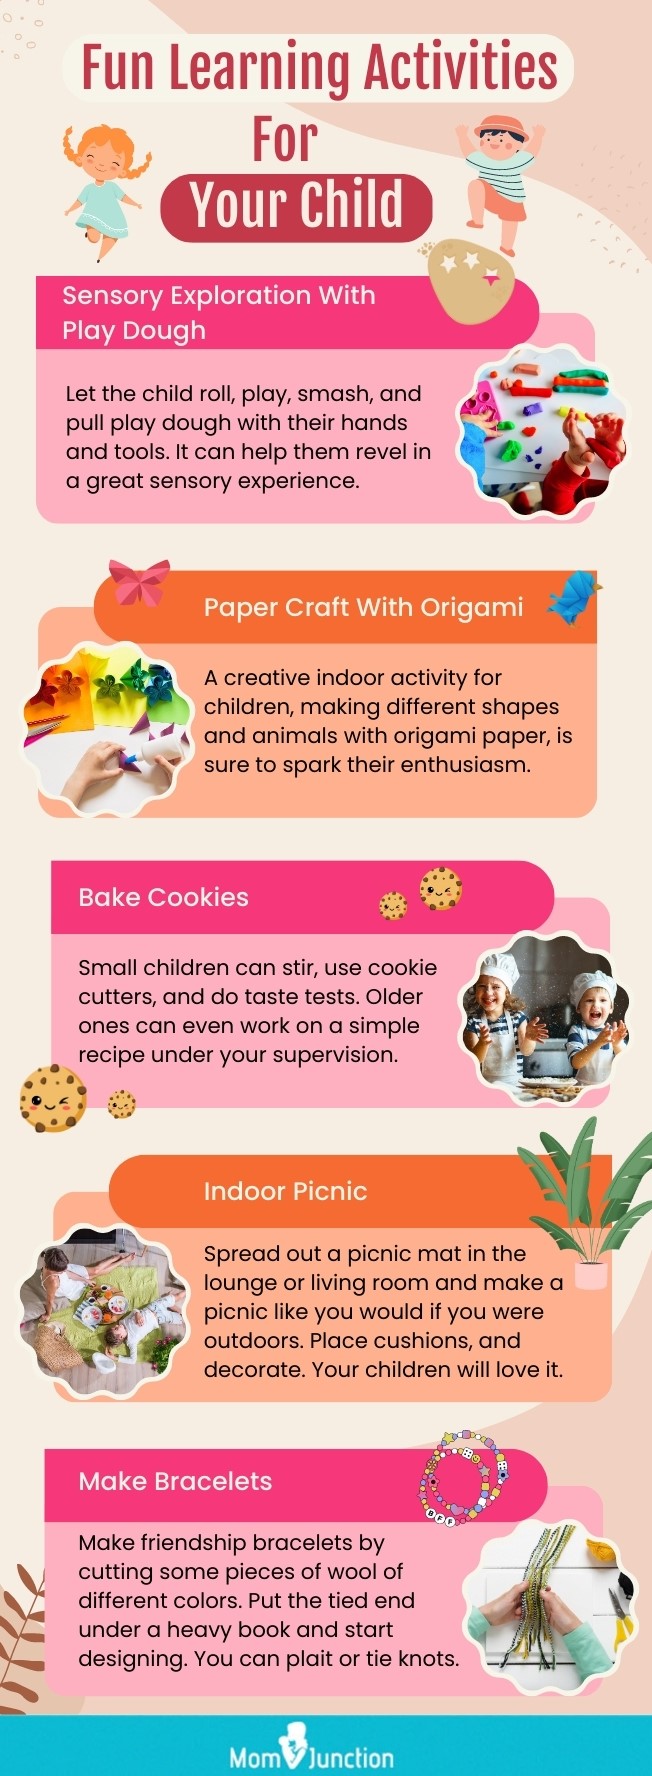 fun learning activities for your child (infographic)